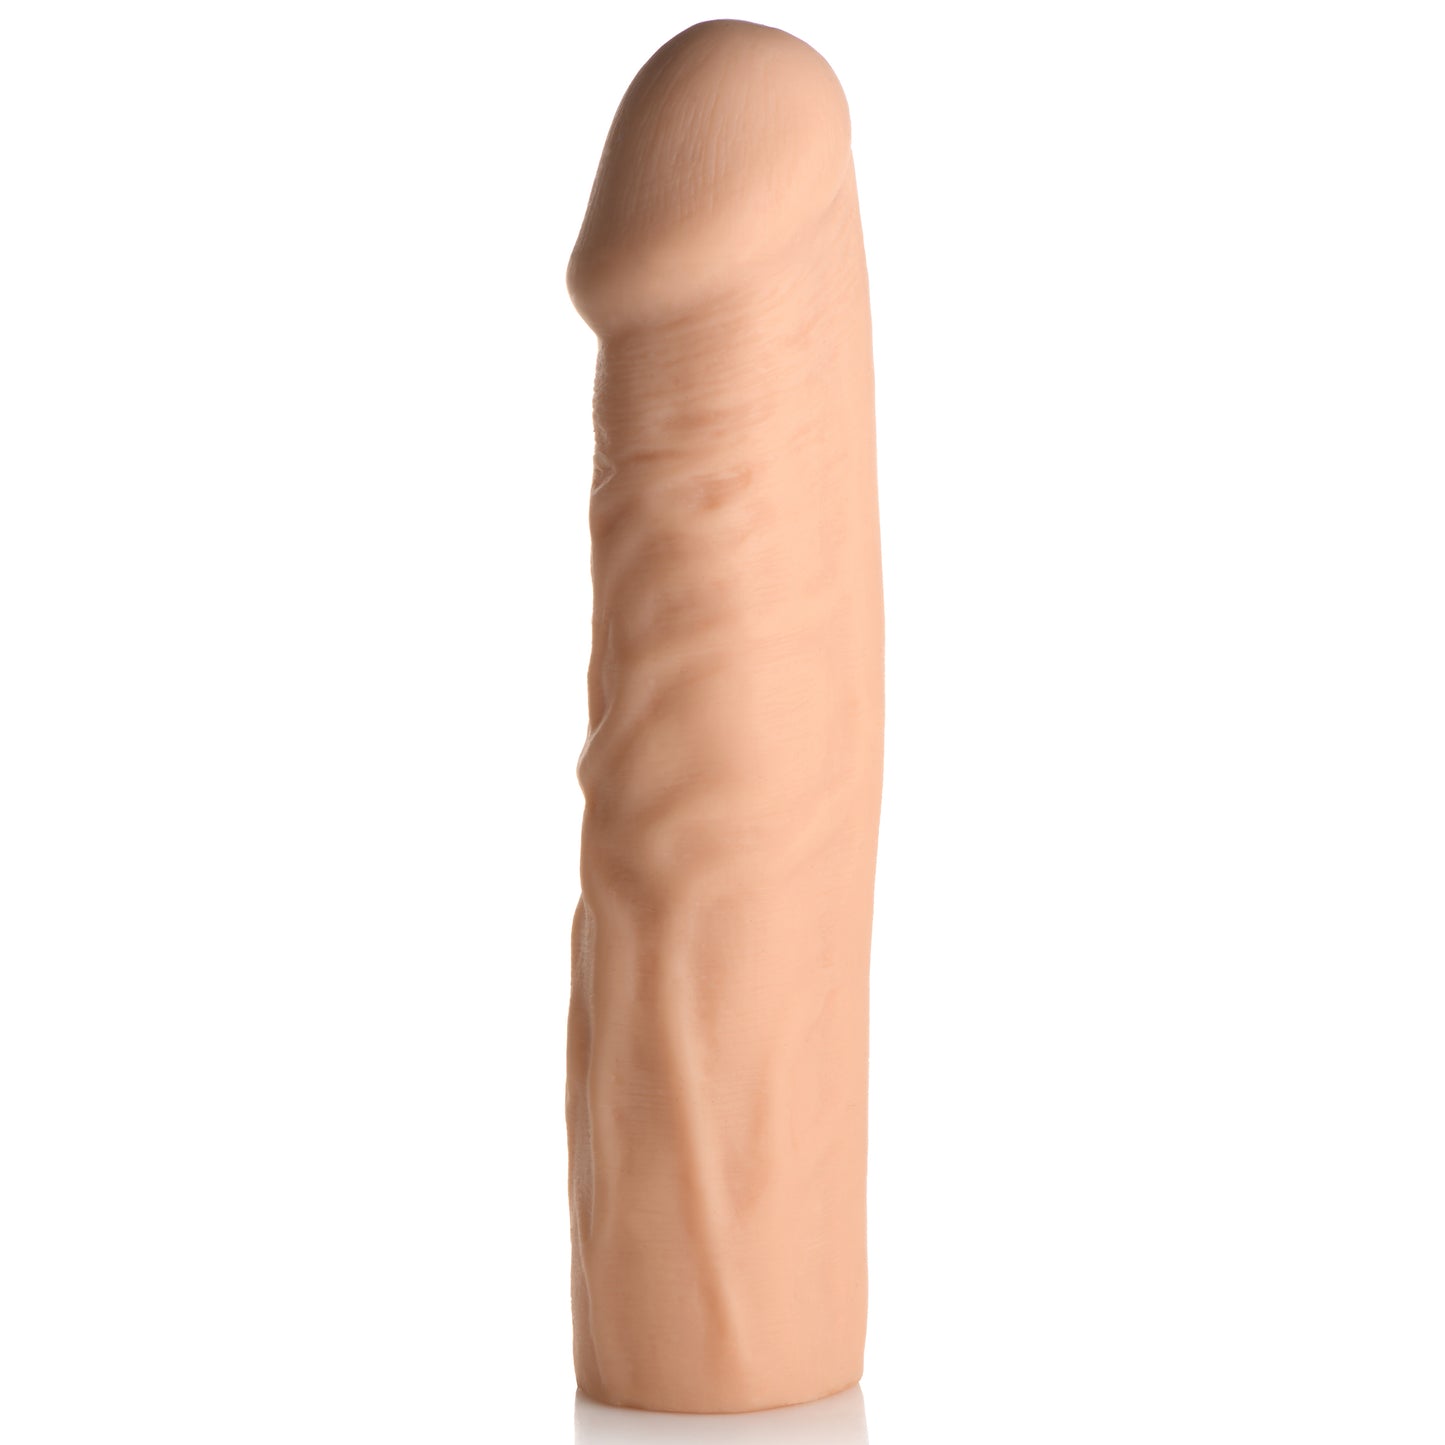 Extra Long 1.5 Inch Penis Extension - Light